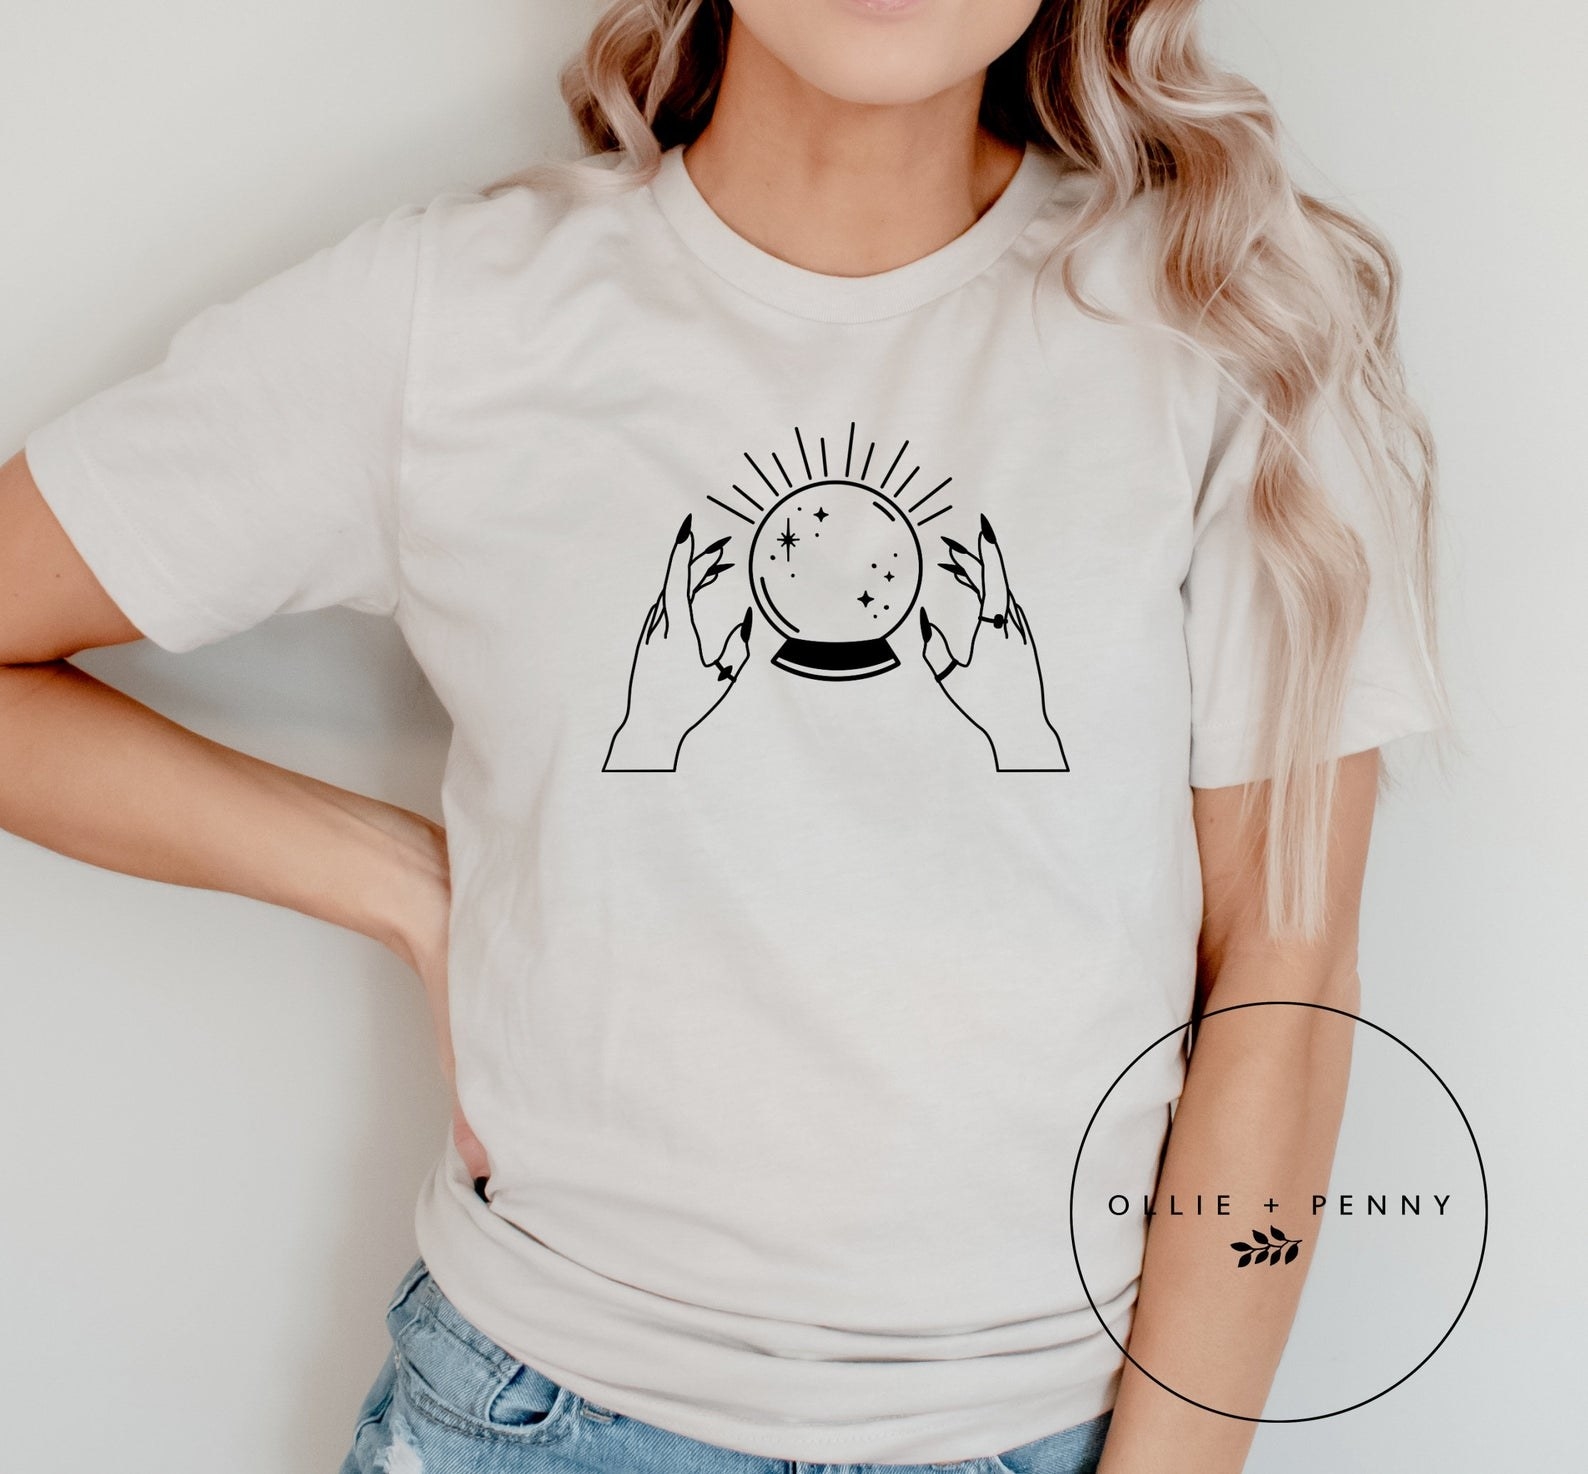 model wearing t-shirt that has a crystal ball on it 